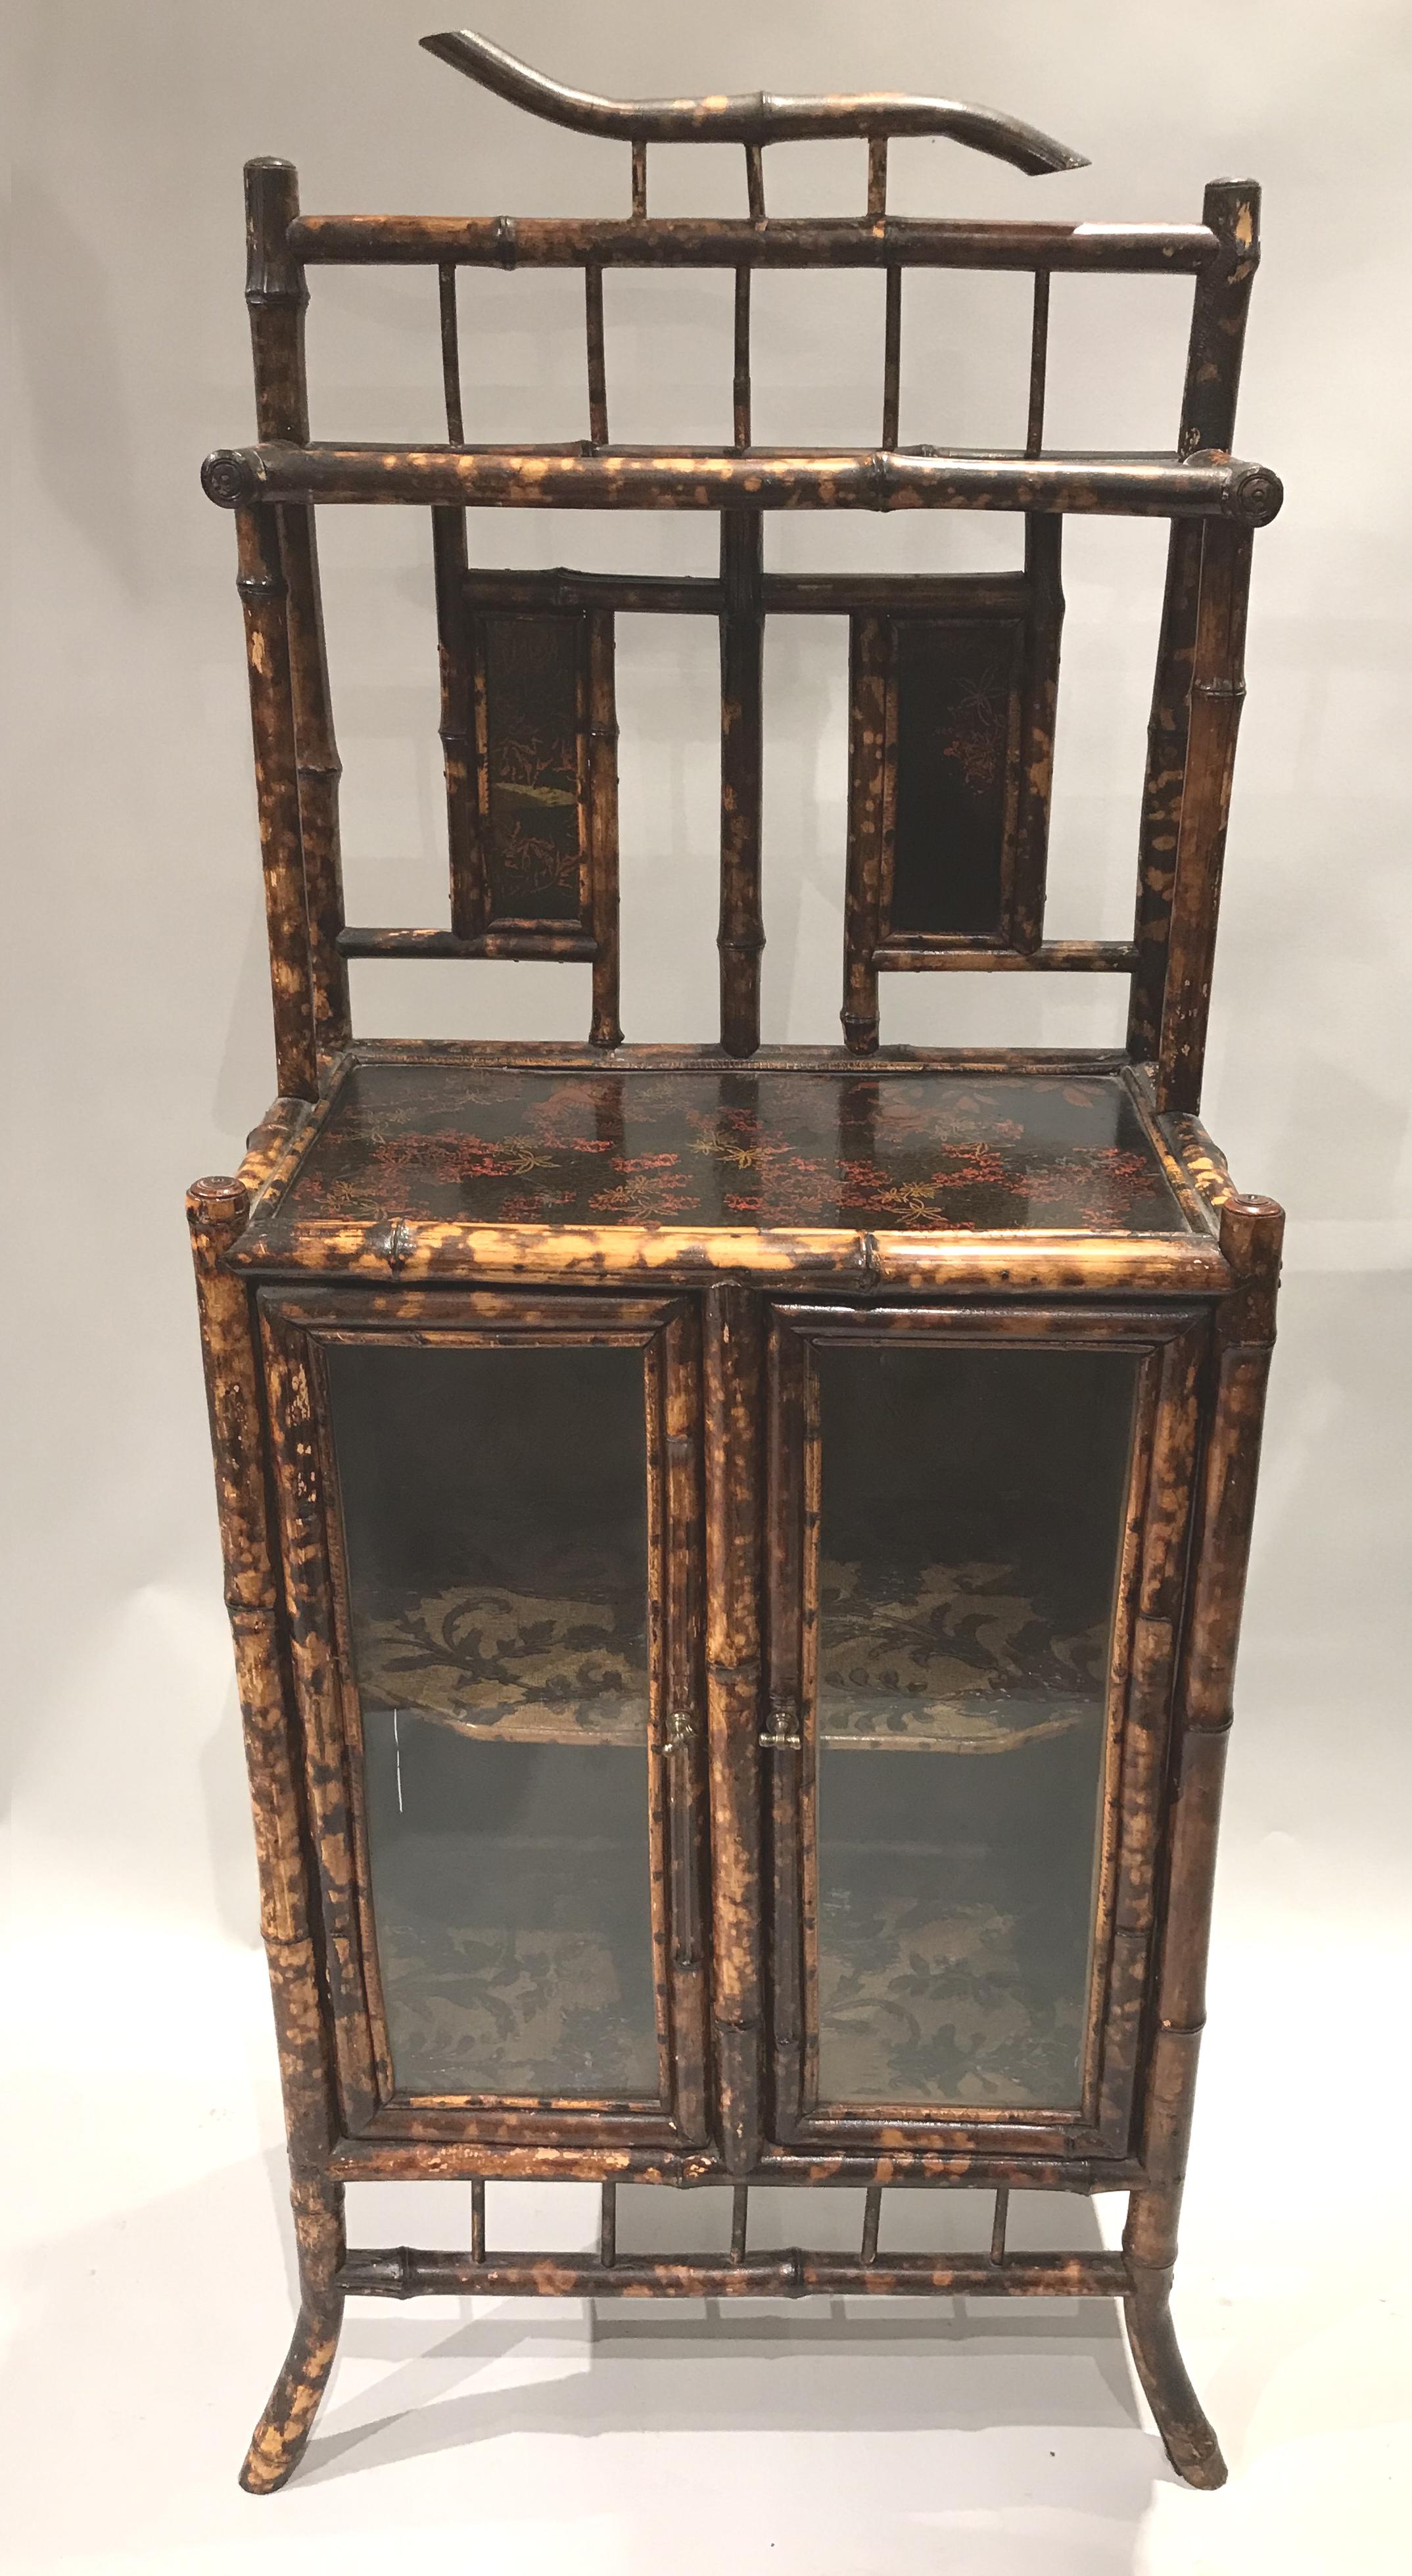 A fine English Victorian bamboo cabinet or etagere with foliate decorated shelves and two glass doors which open to a foliate paper lined one shelf interior compartment. Very good condition, with minor losses and restorations, as well as light